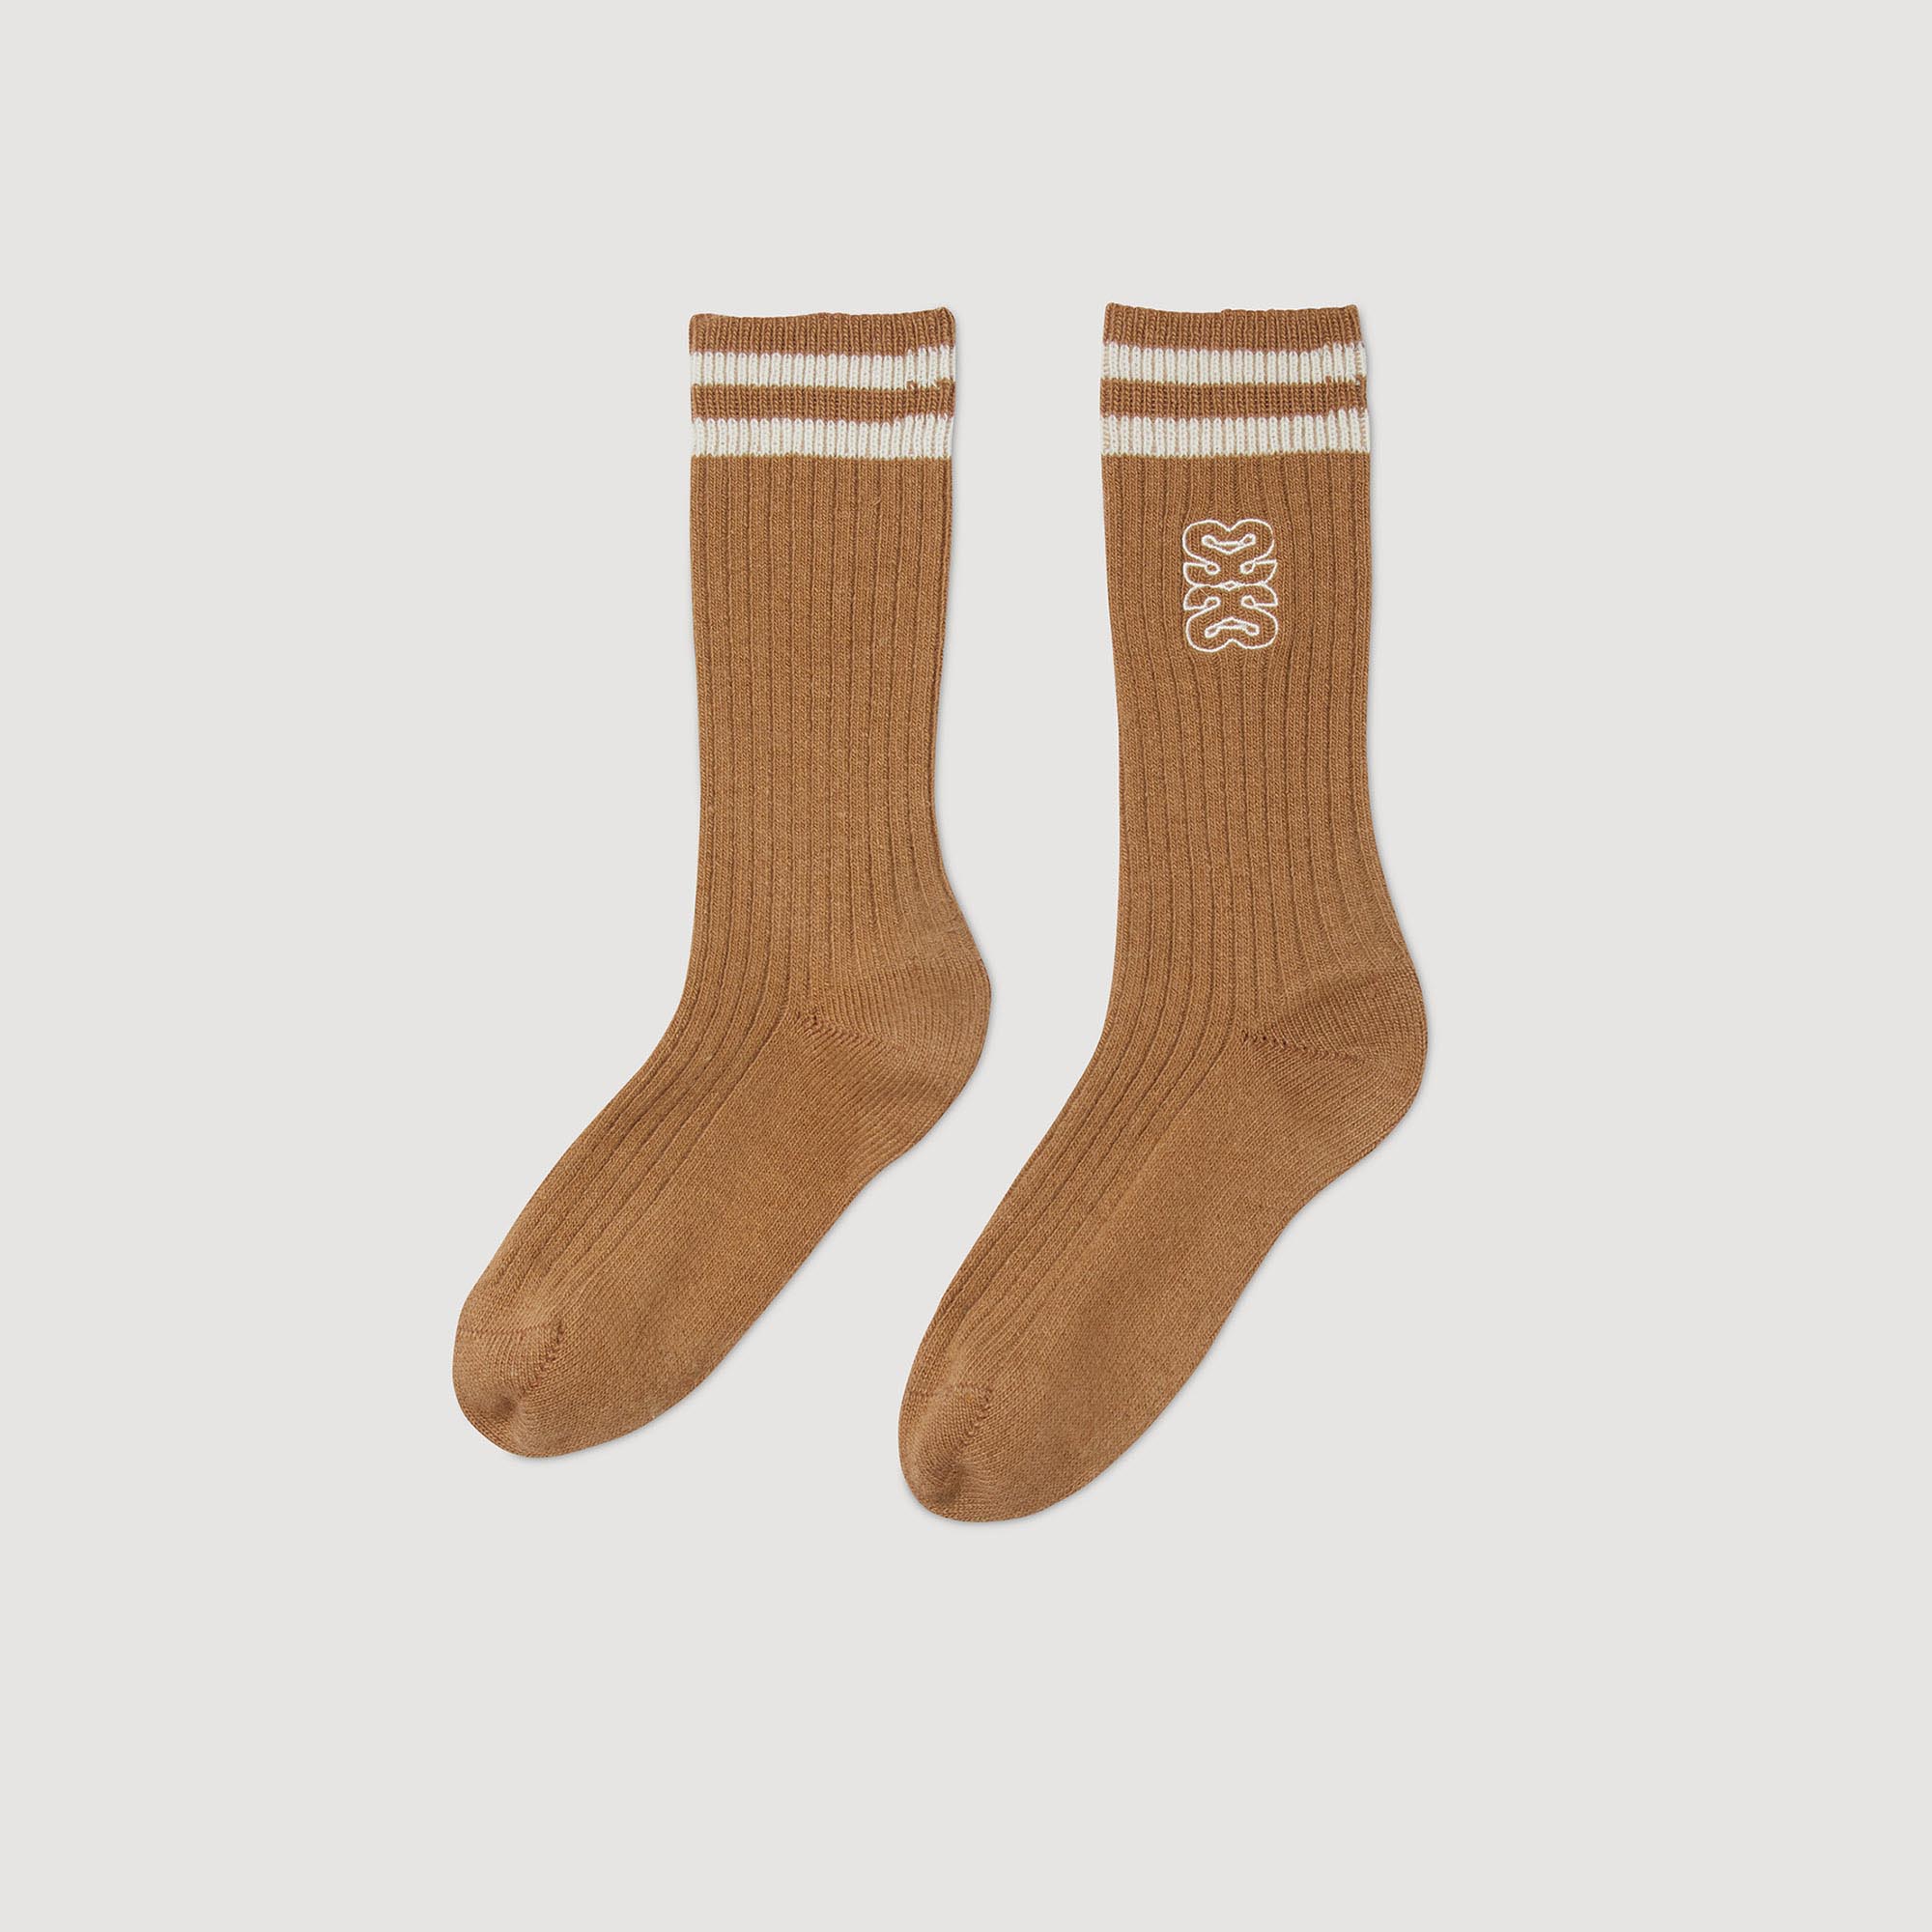 Sandro wool Ribbed striped socks embellished with contrasting multi-S embroidery on the ankle